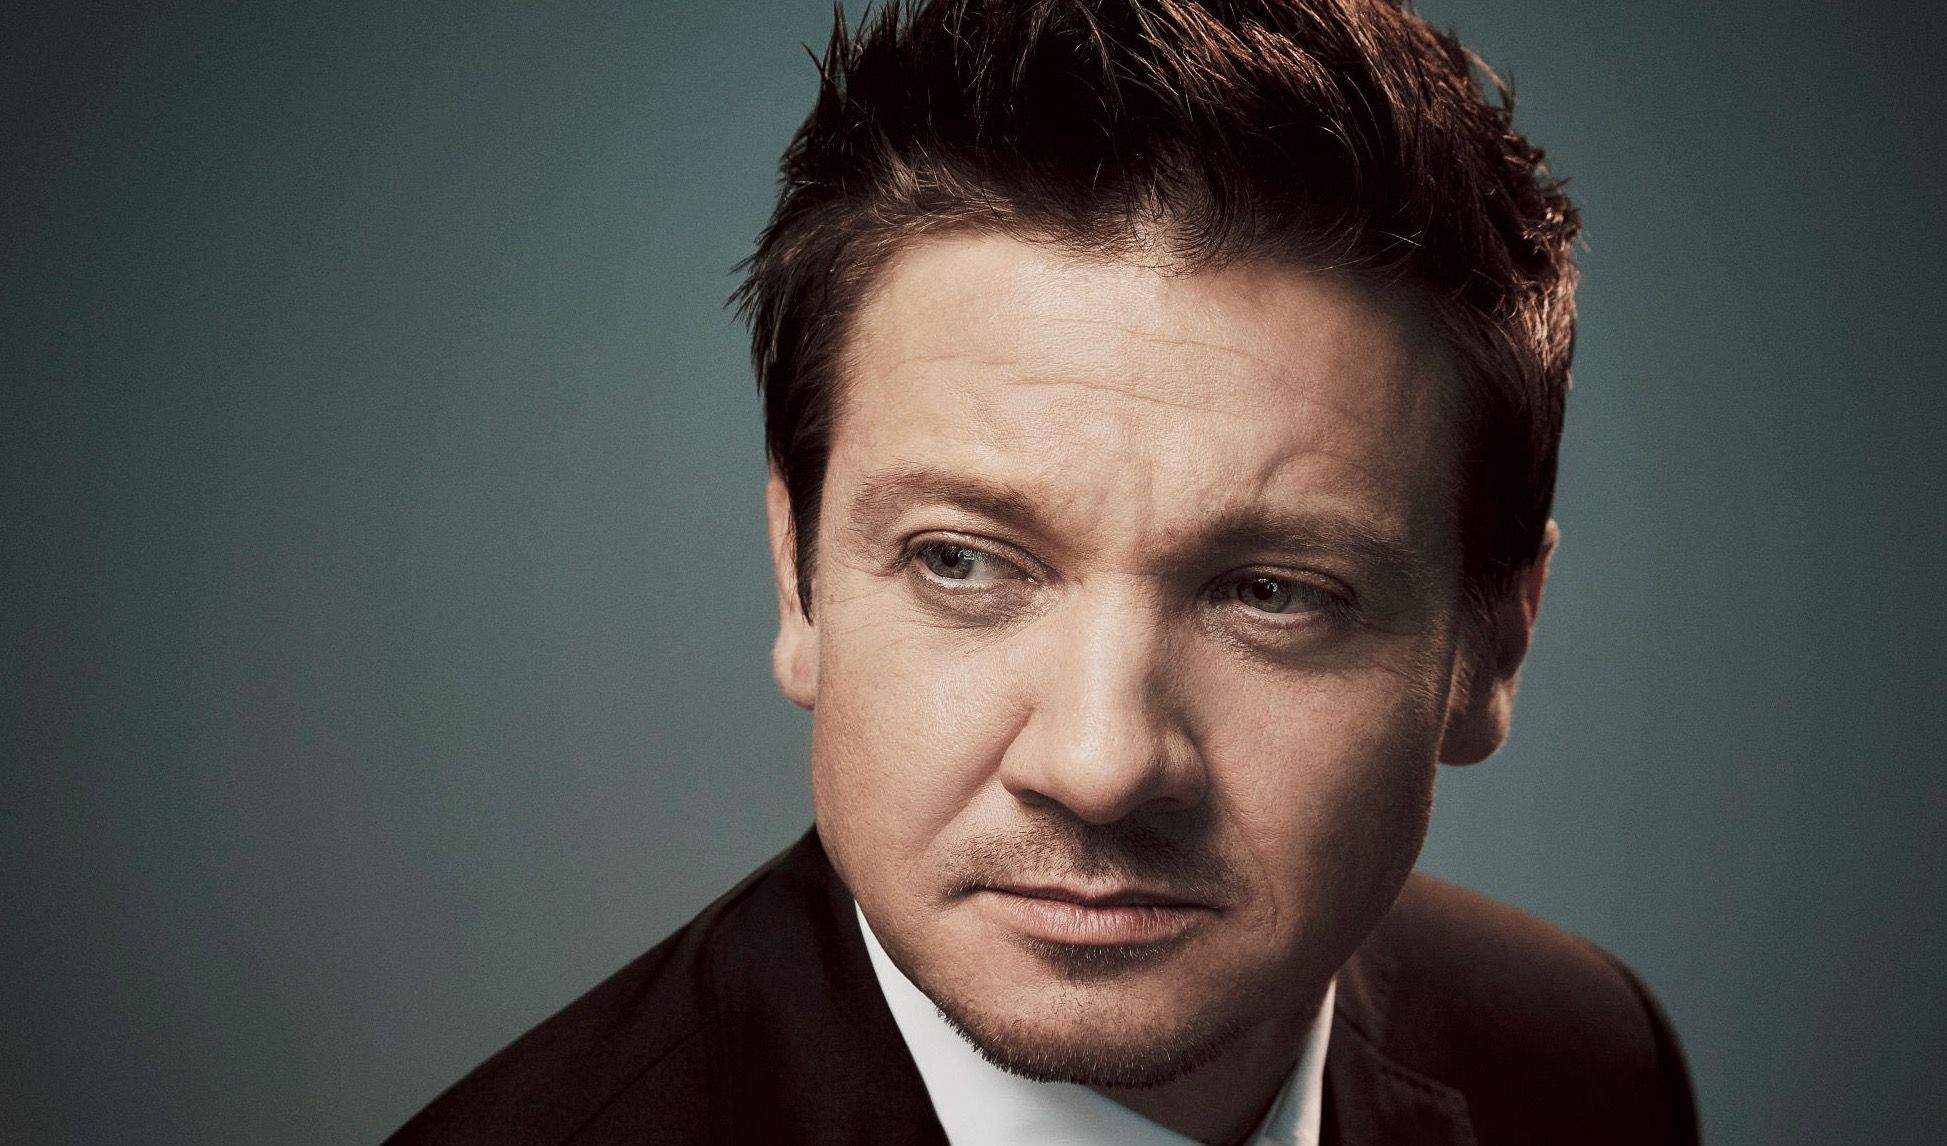 A photo of Jeremy Renner against a gray background.